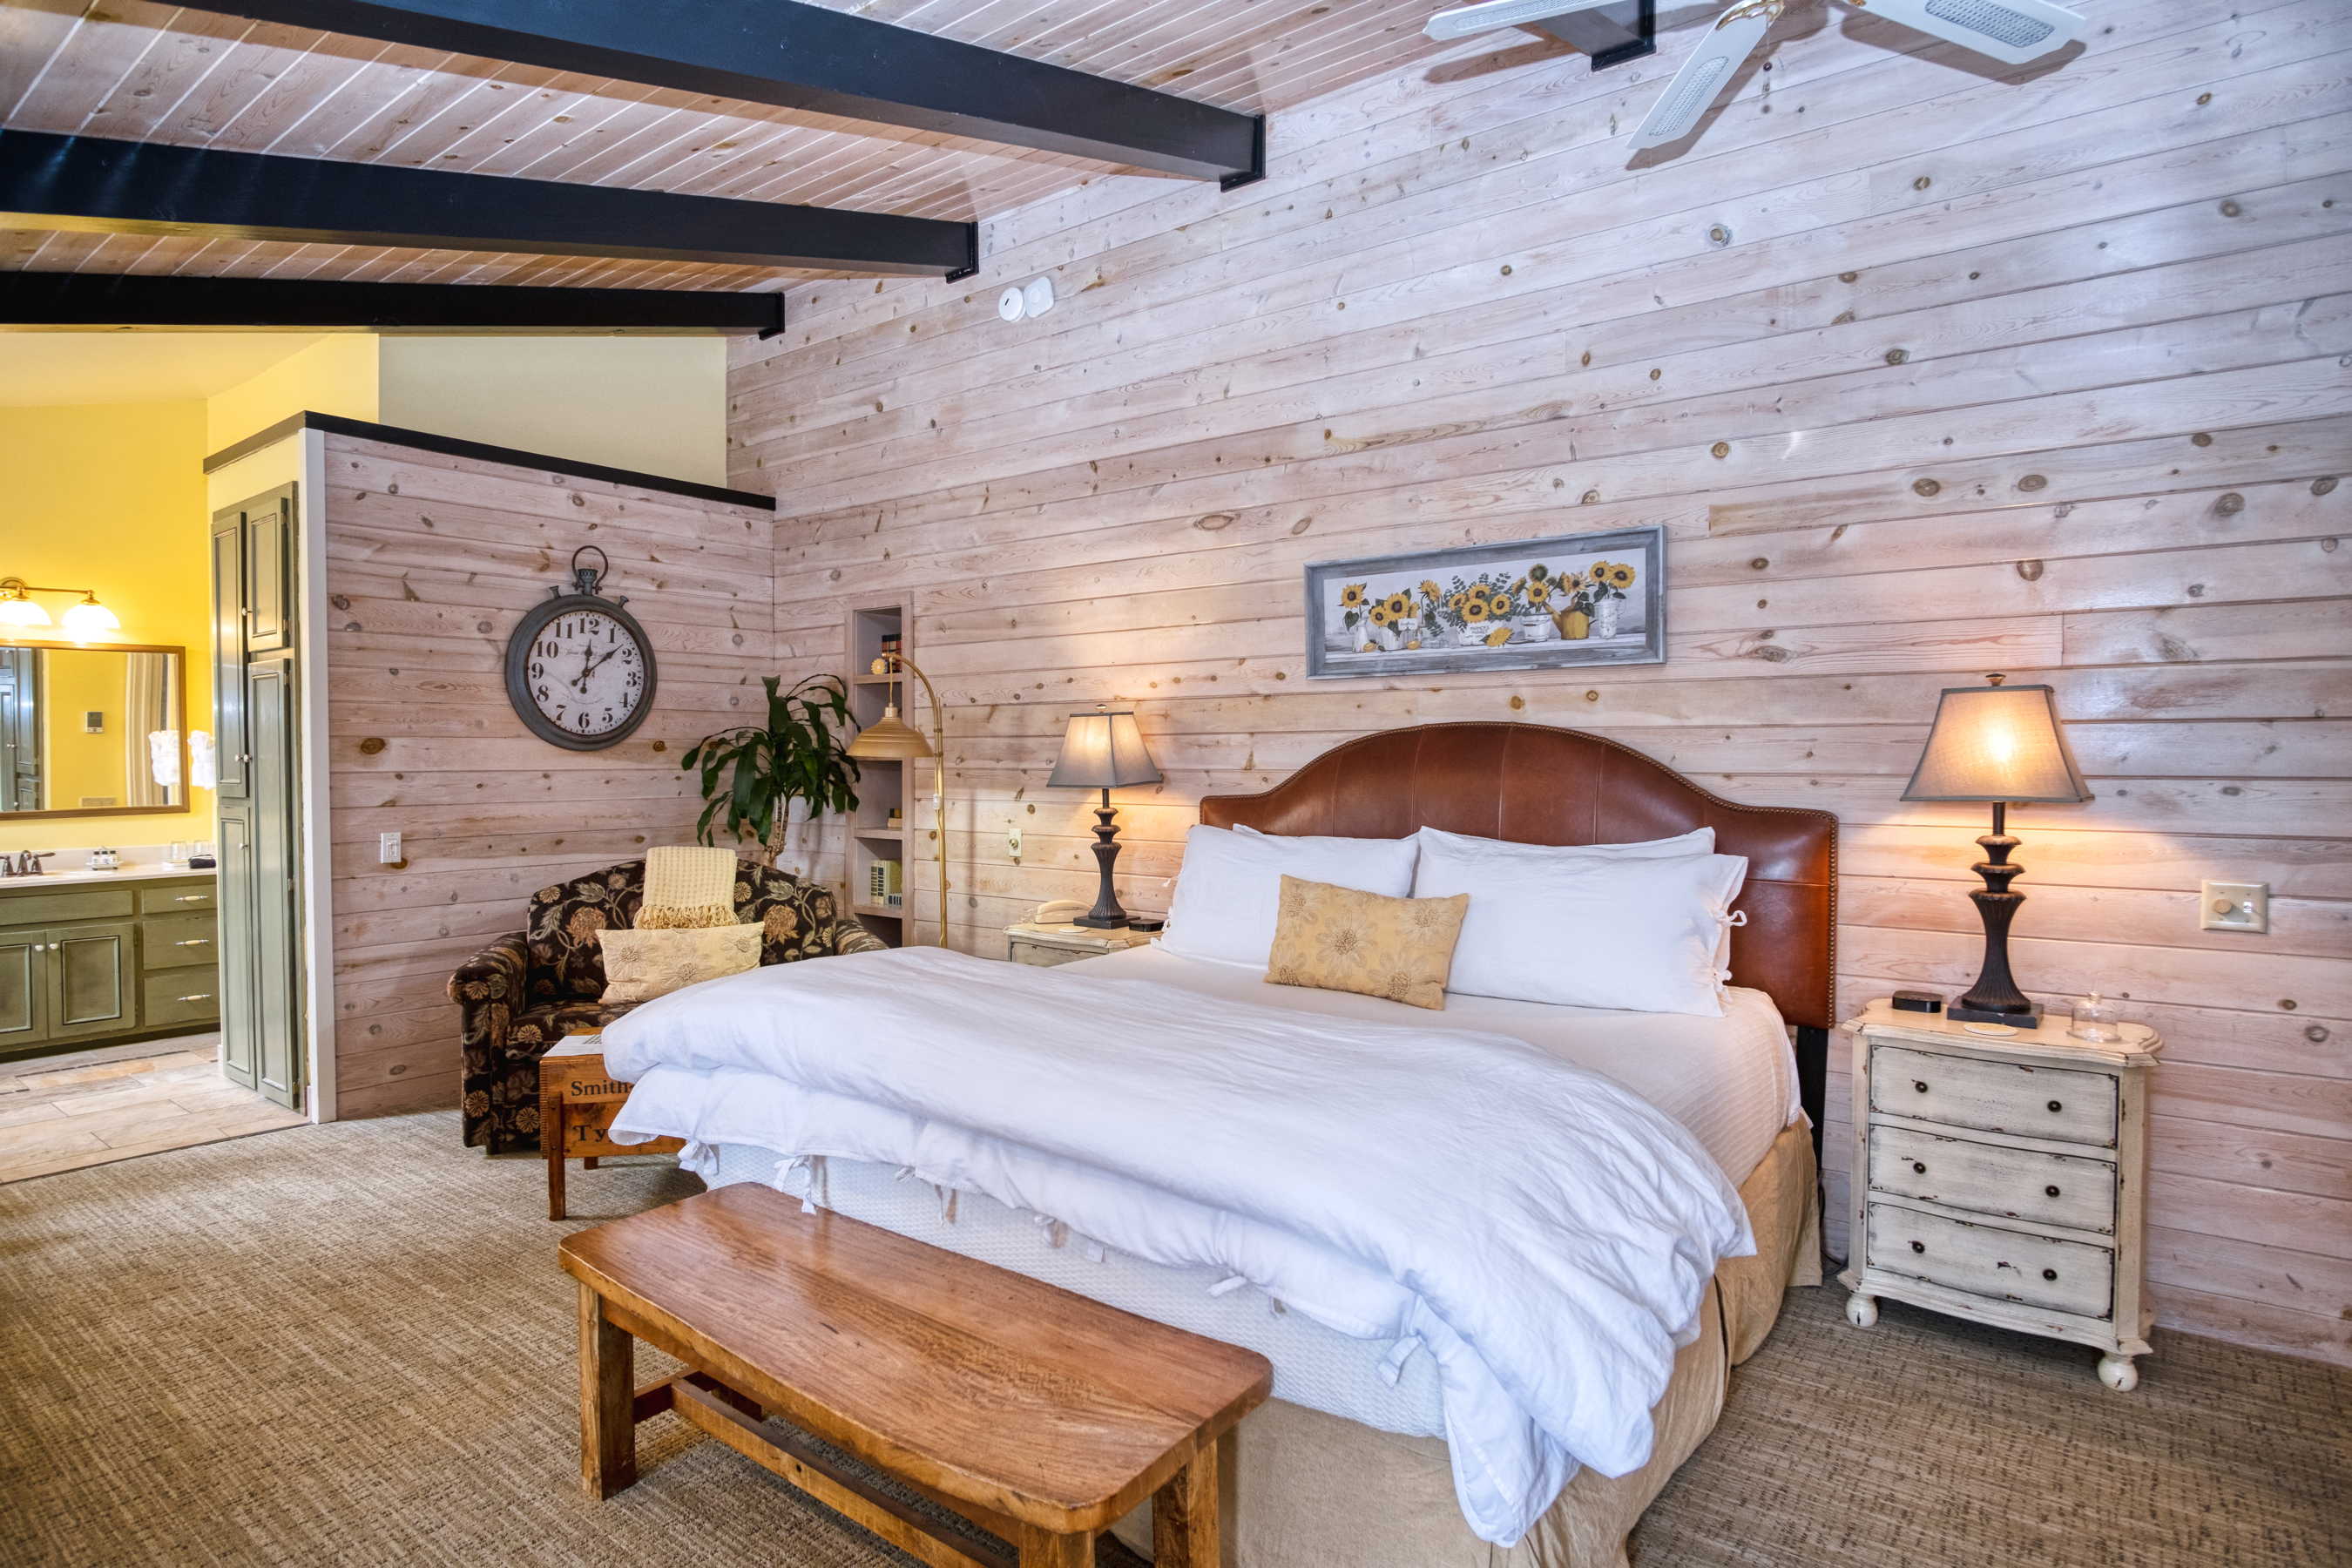 The Sunrise Suite at Country Willows Inn & Estate in Ashland, Oregon has cheerful interior with yellows, golds, and browns surrounding the king bed, fireplace, and roman soaking tub.